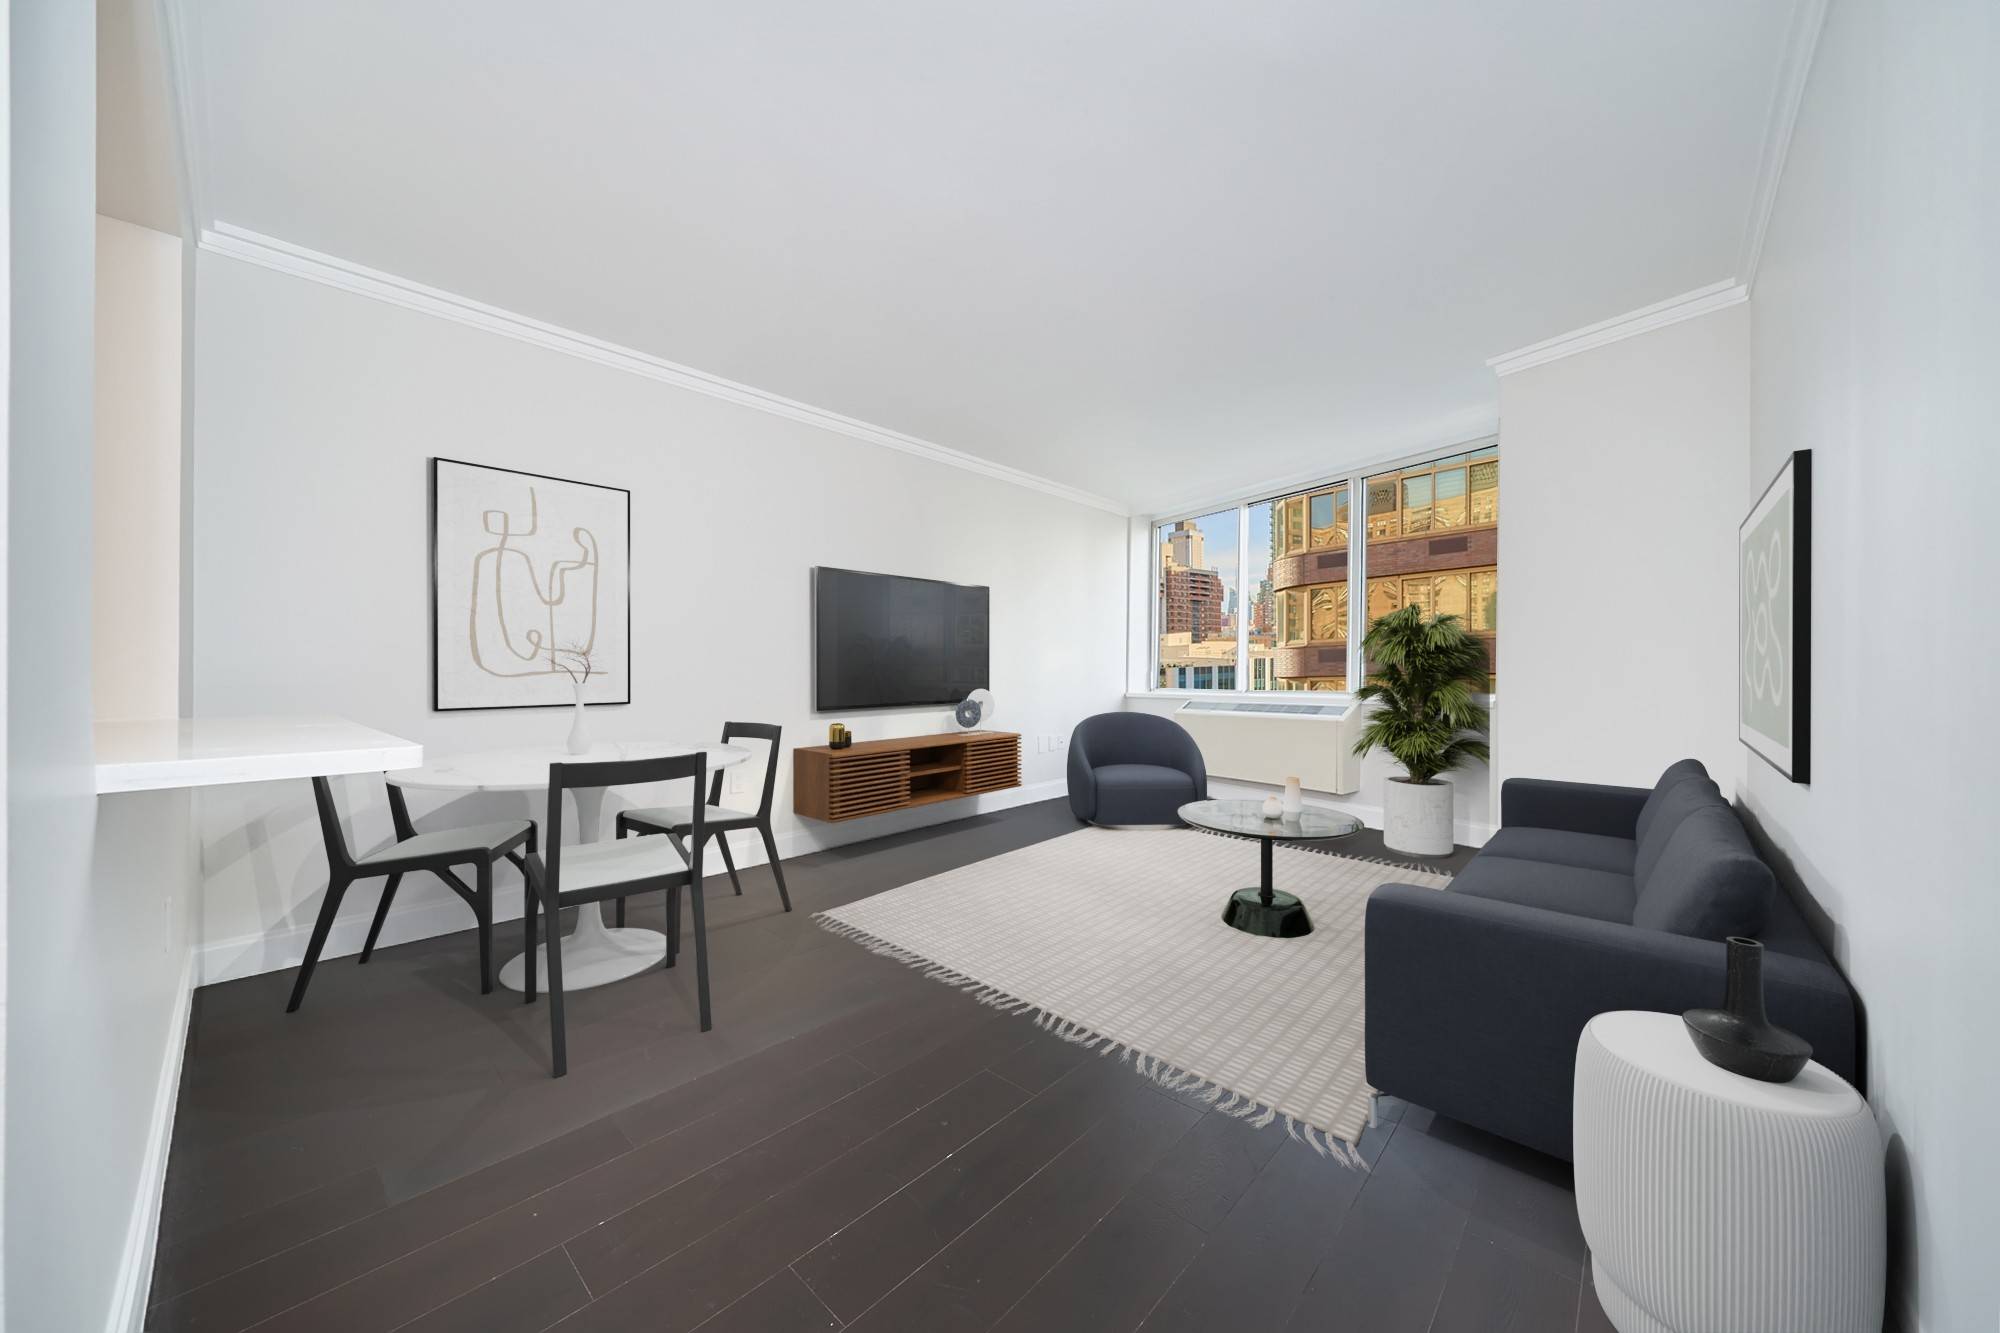 Beautiful Gut Renovated South Facing 1 Bedroom located in the heart of Lincoln Square in the iconic building at 160 Riverside Blvd.